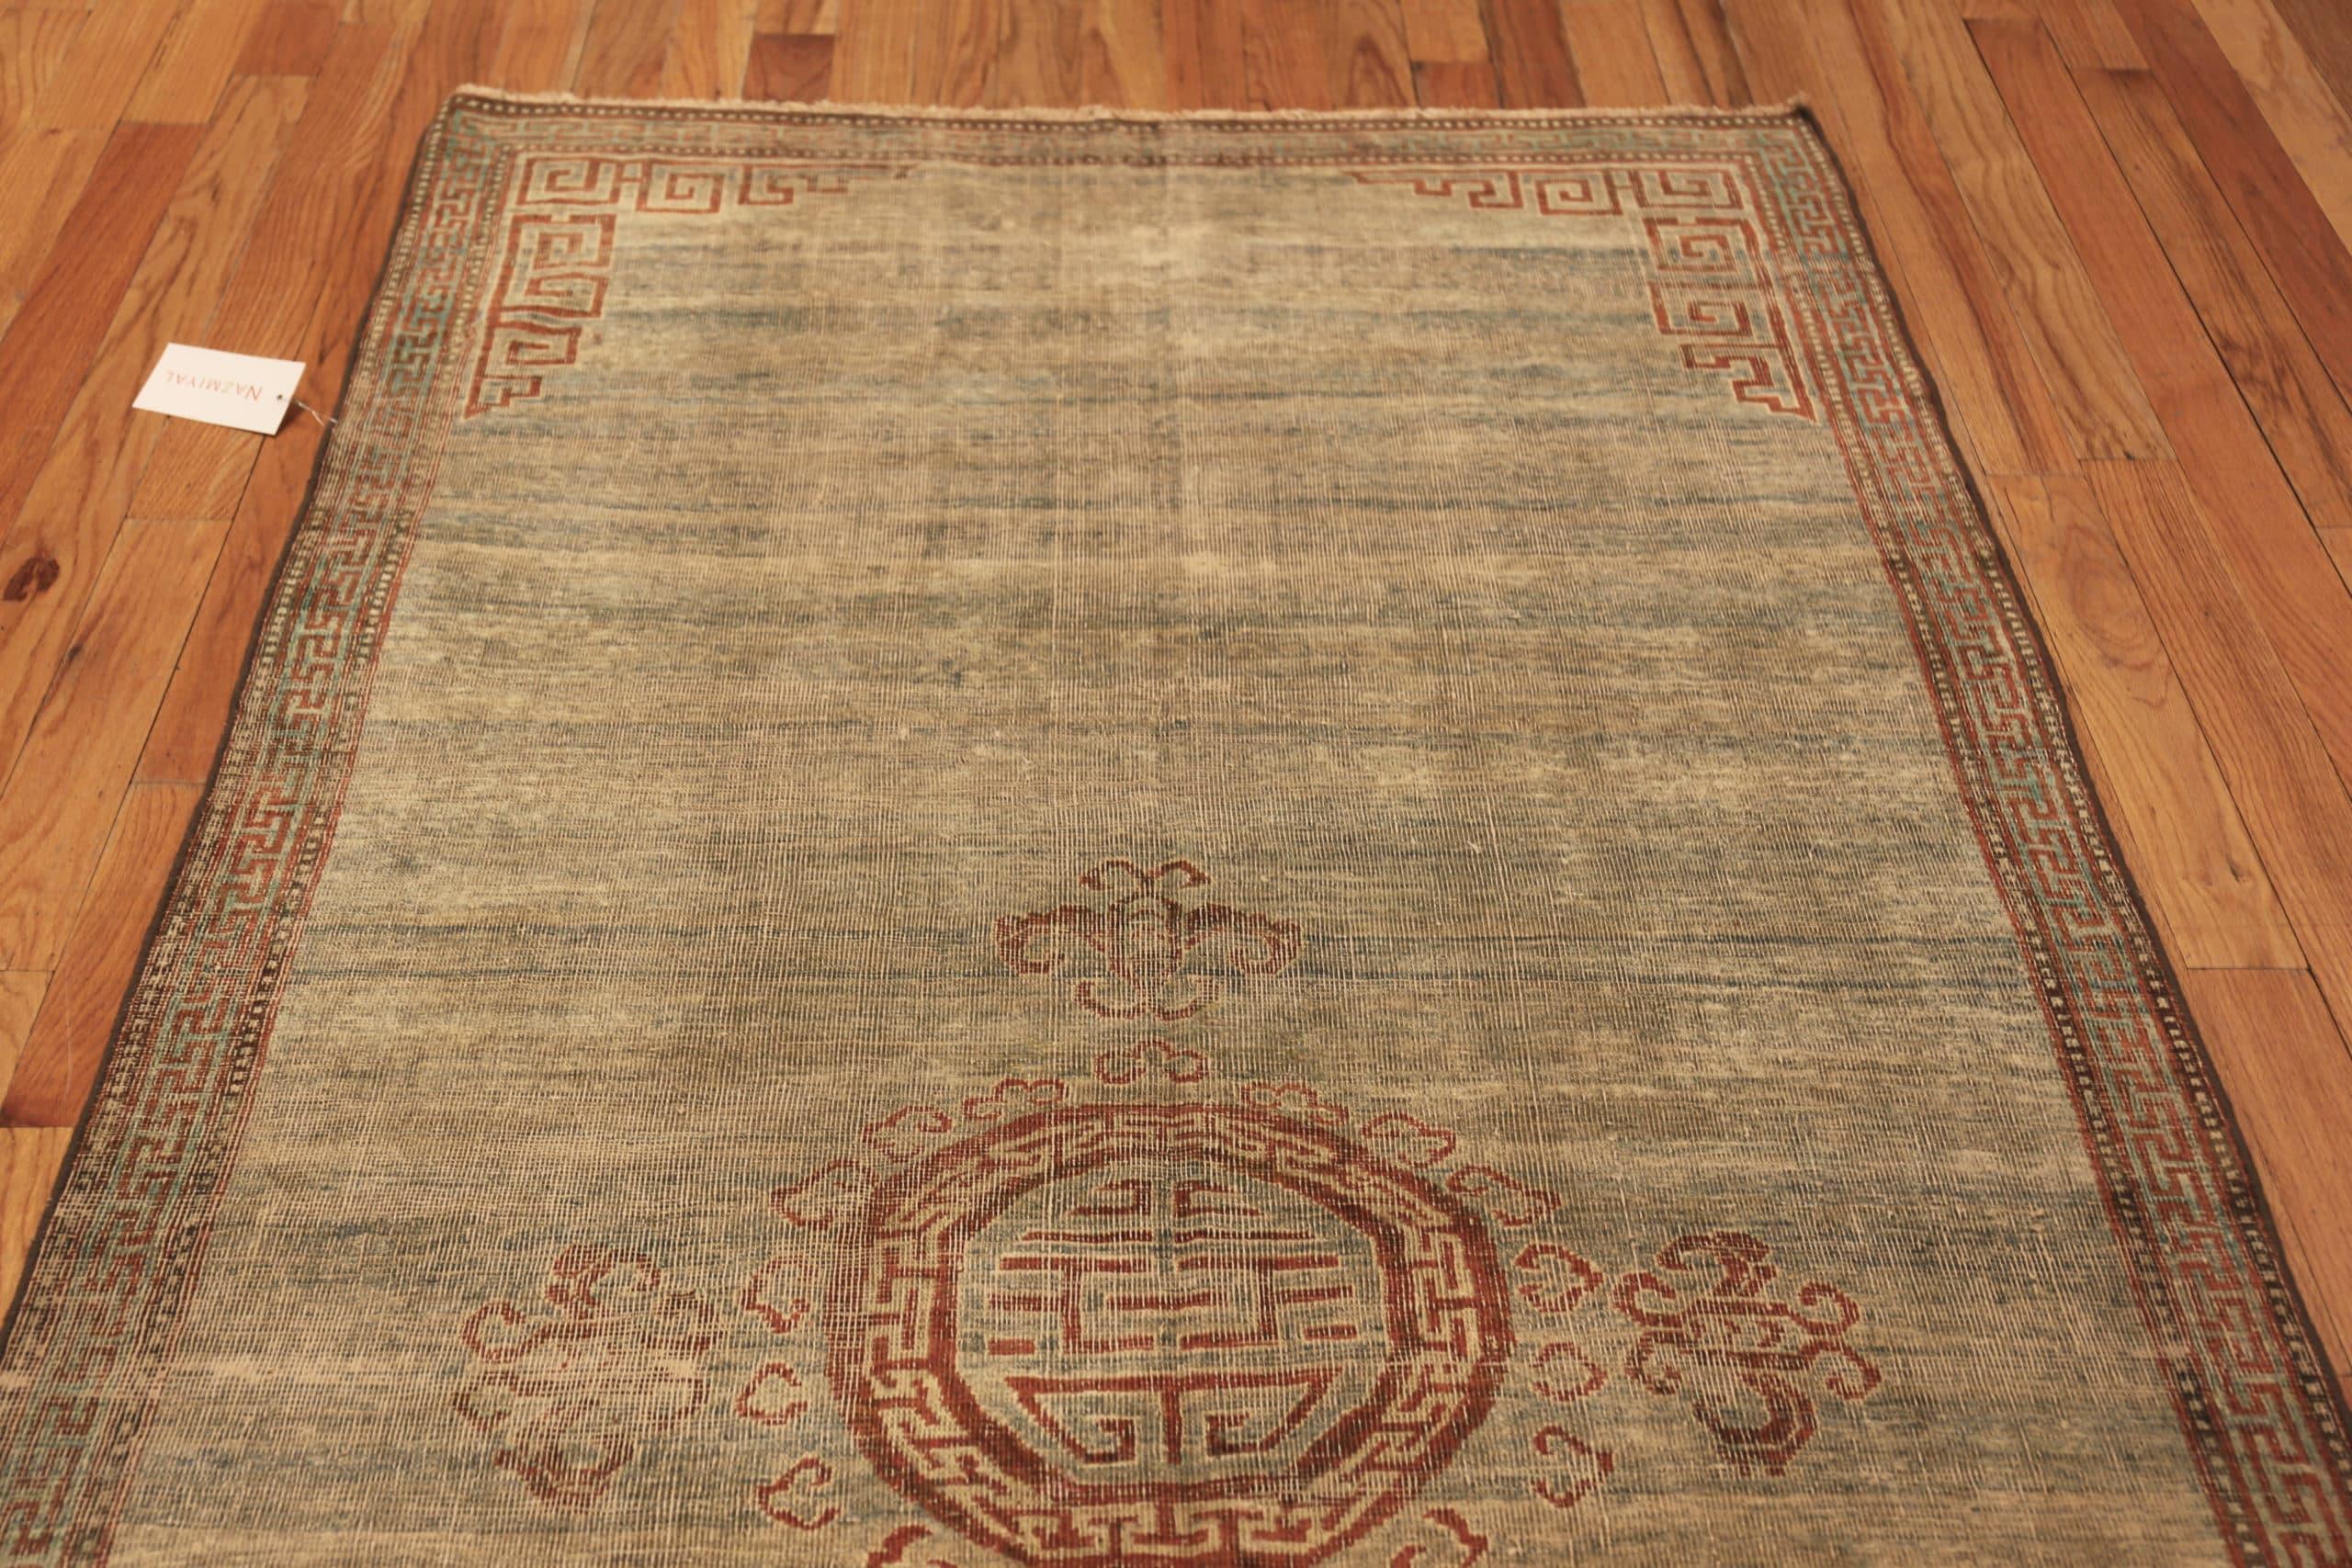 19th Century Nazmiyal Collection Antique East Turkestan Khotan Rug. 4 ft 5 in x 9 ft 10 in